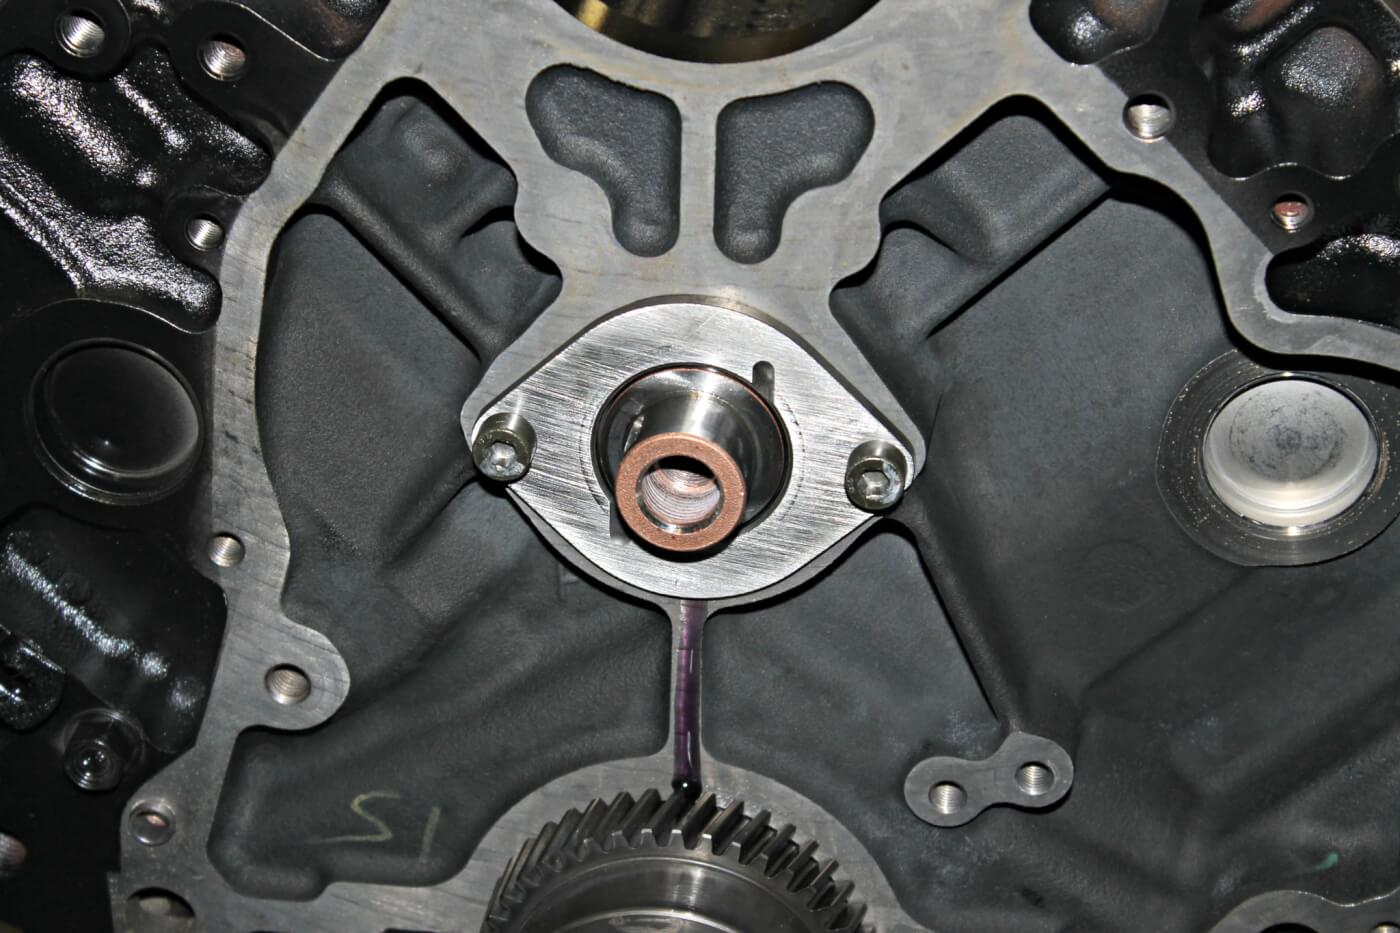 4. Once installed in the engine block, the camshaft has a small two-bolt retainer that holds it in place. All performance camshafts offered by Empire Diesel come pre-machined with a keyway on the end to help with locating the timing gear set. The keyway is a much stronger design than the factory dowel pin, which has been known to shear off in higher-performance applications.